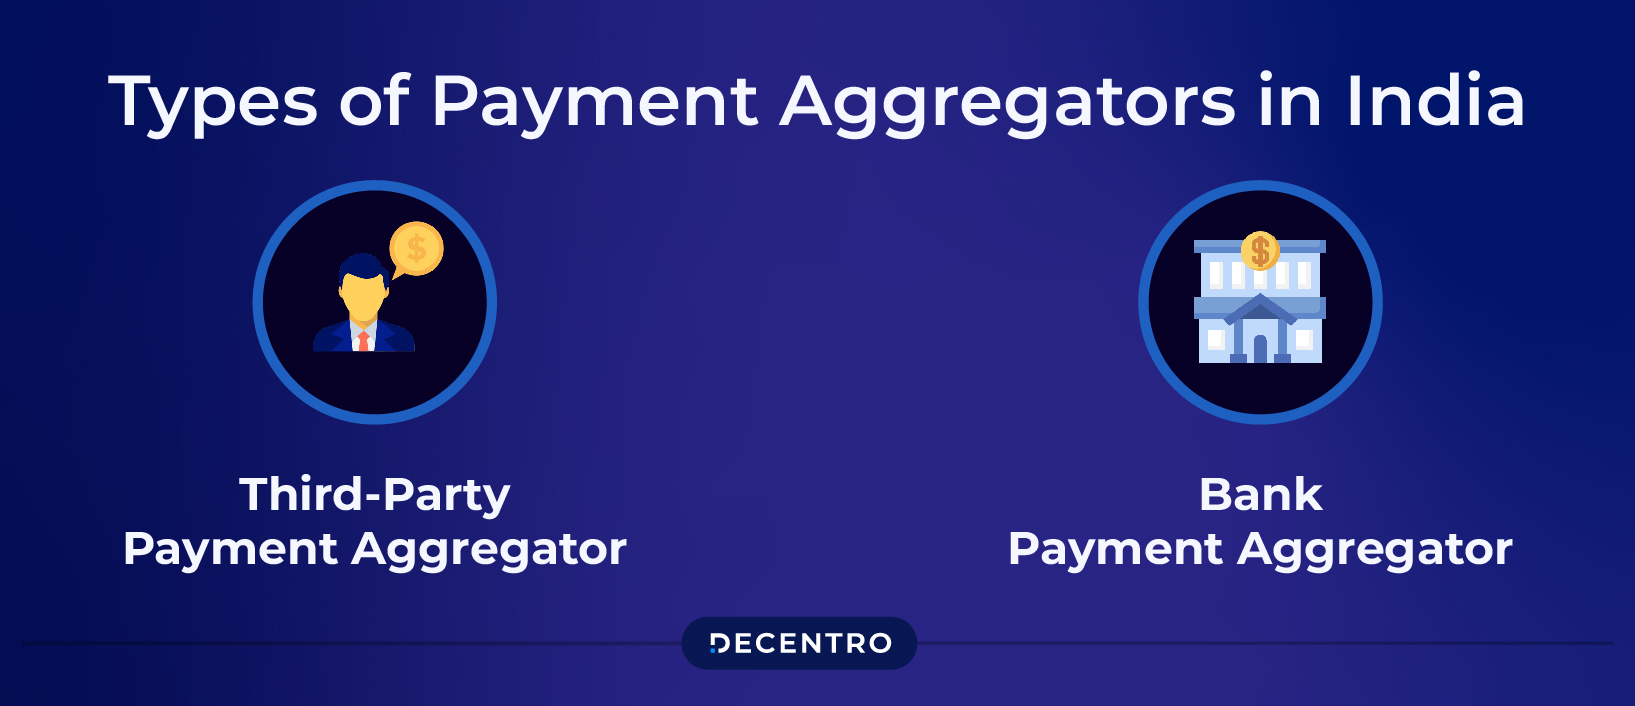 Types of Payment Aggregators 